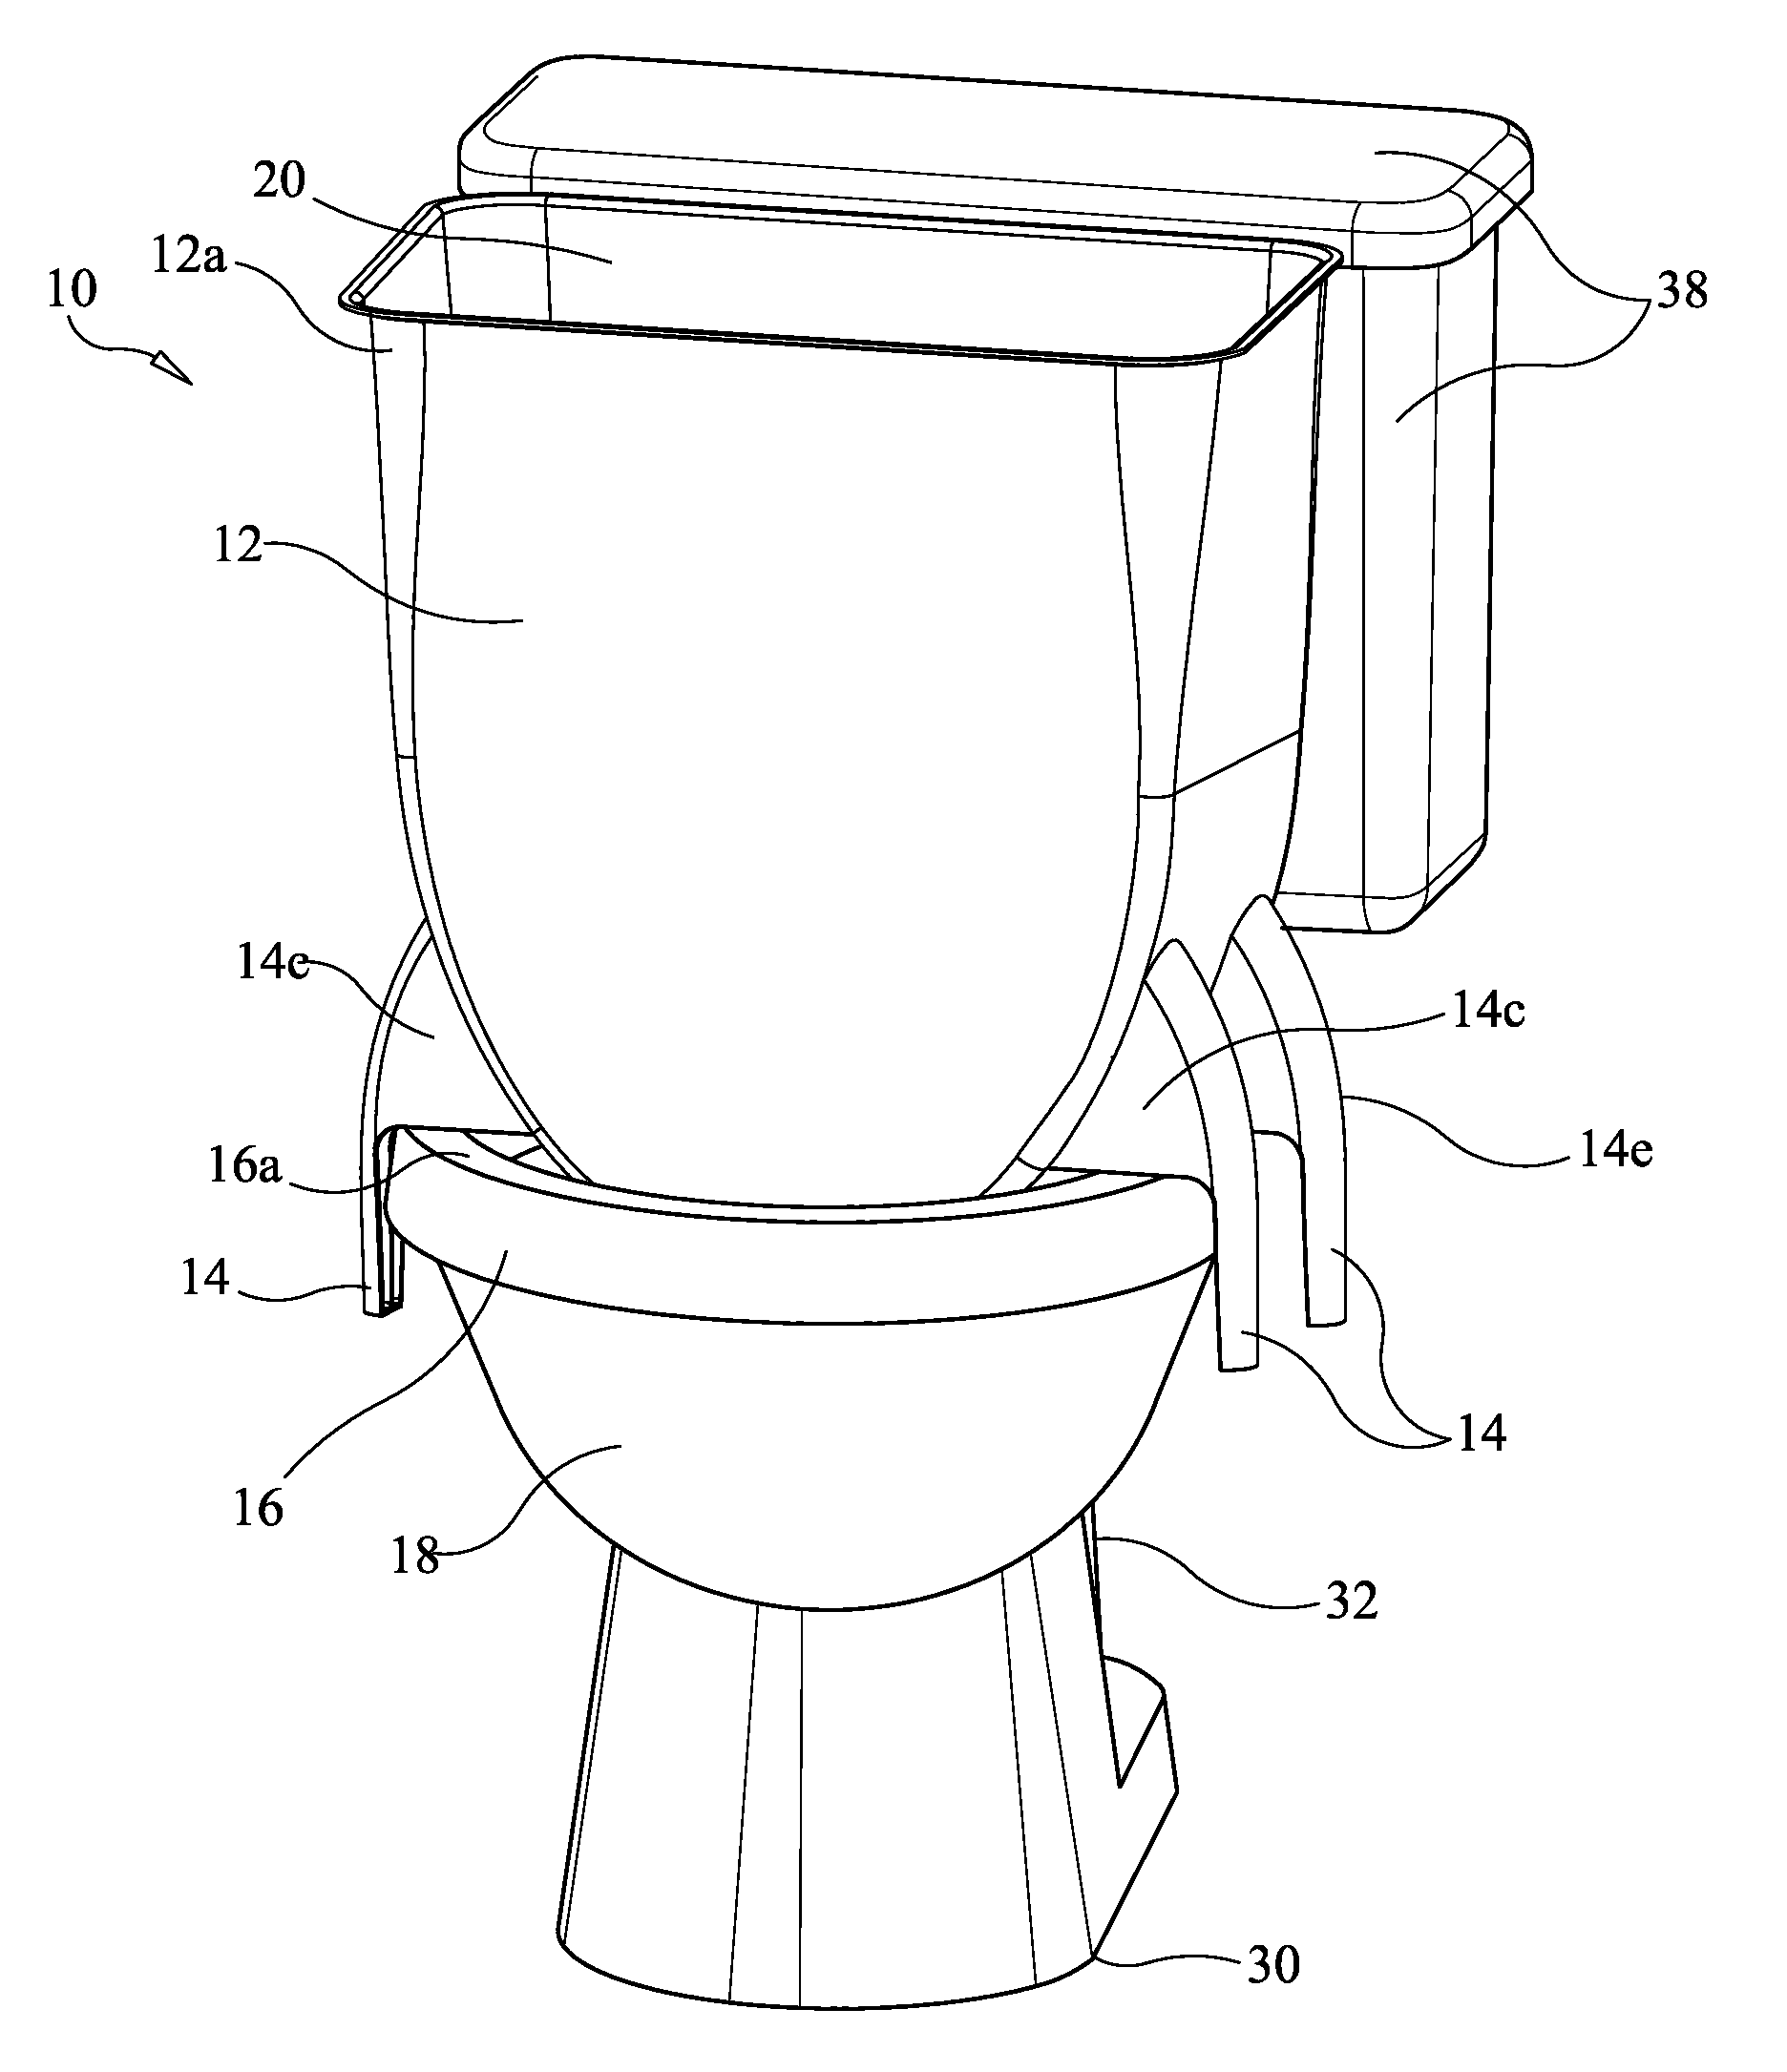 Combination rinsing tub for toilet and trash receptacle